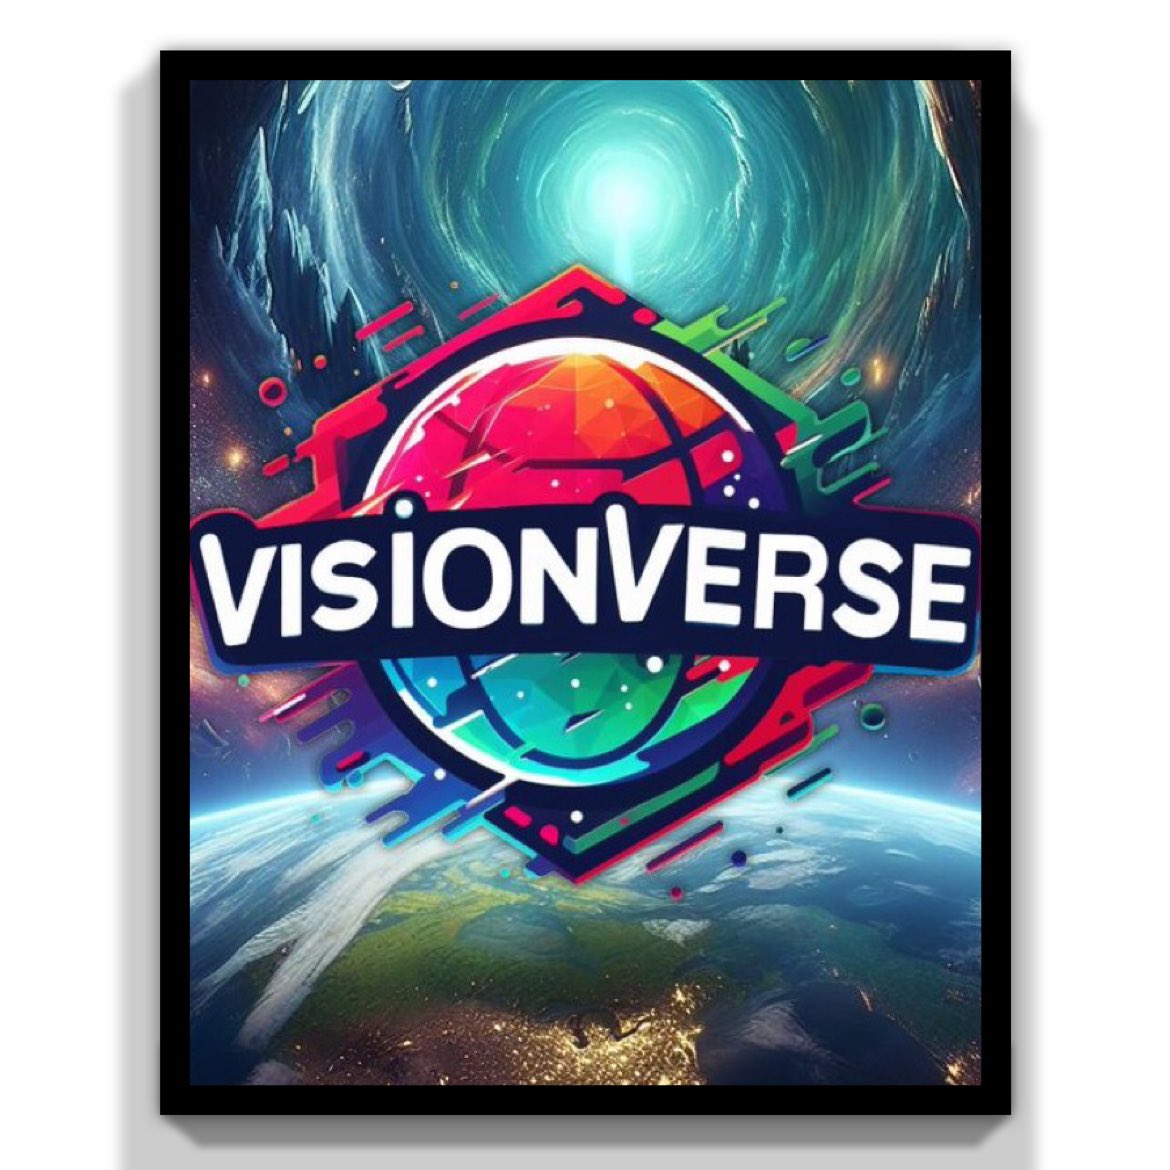 Friendsss, $VISION is gearing up with Visionverse for the Metaverse Trend, promising a whole new way to play, create, and earn 💰

Visionverse isn't just about land, it's about Nodes, hubs of creativity where anyone can build games without coding skills. These games can monetize